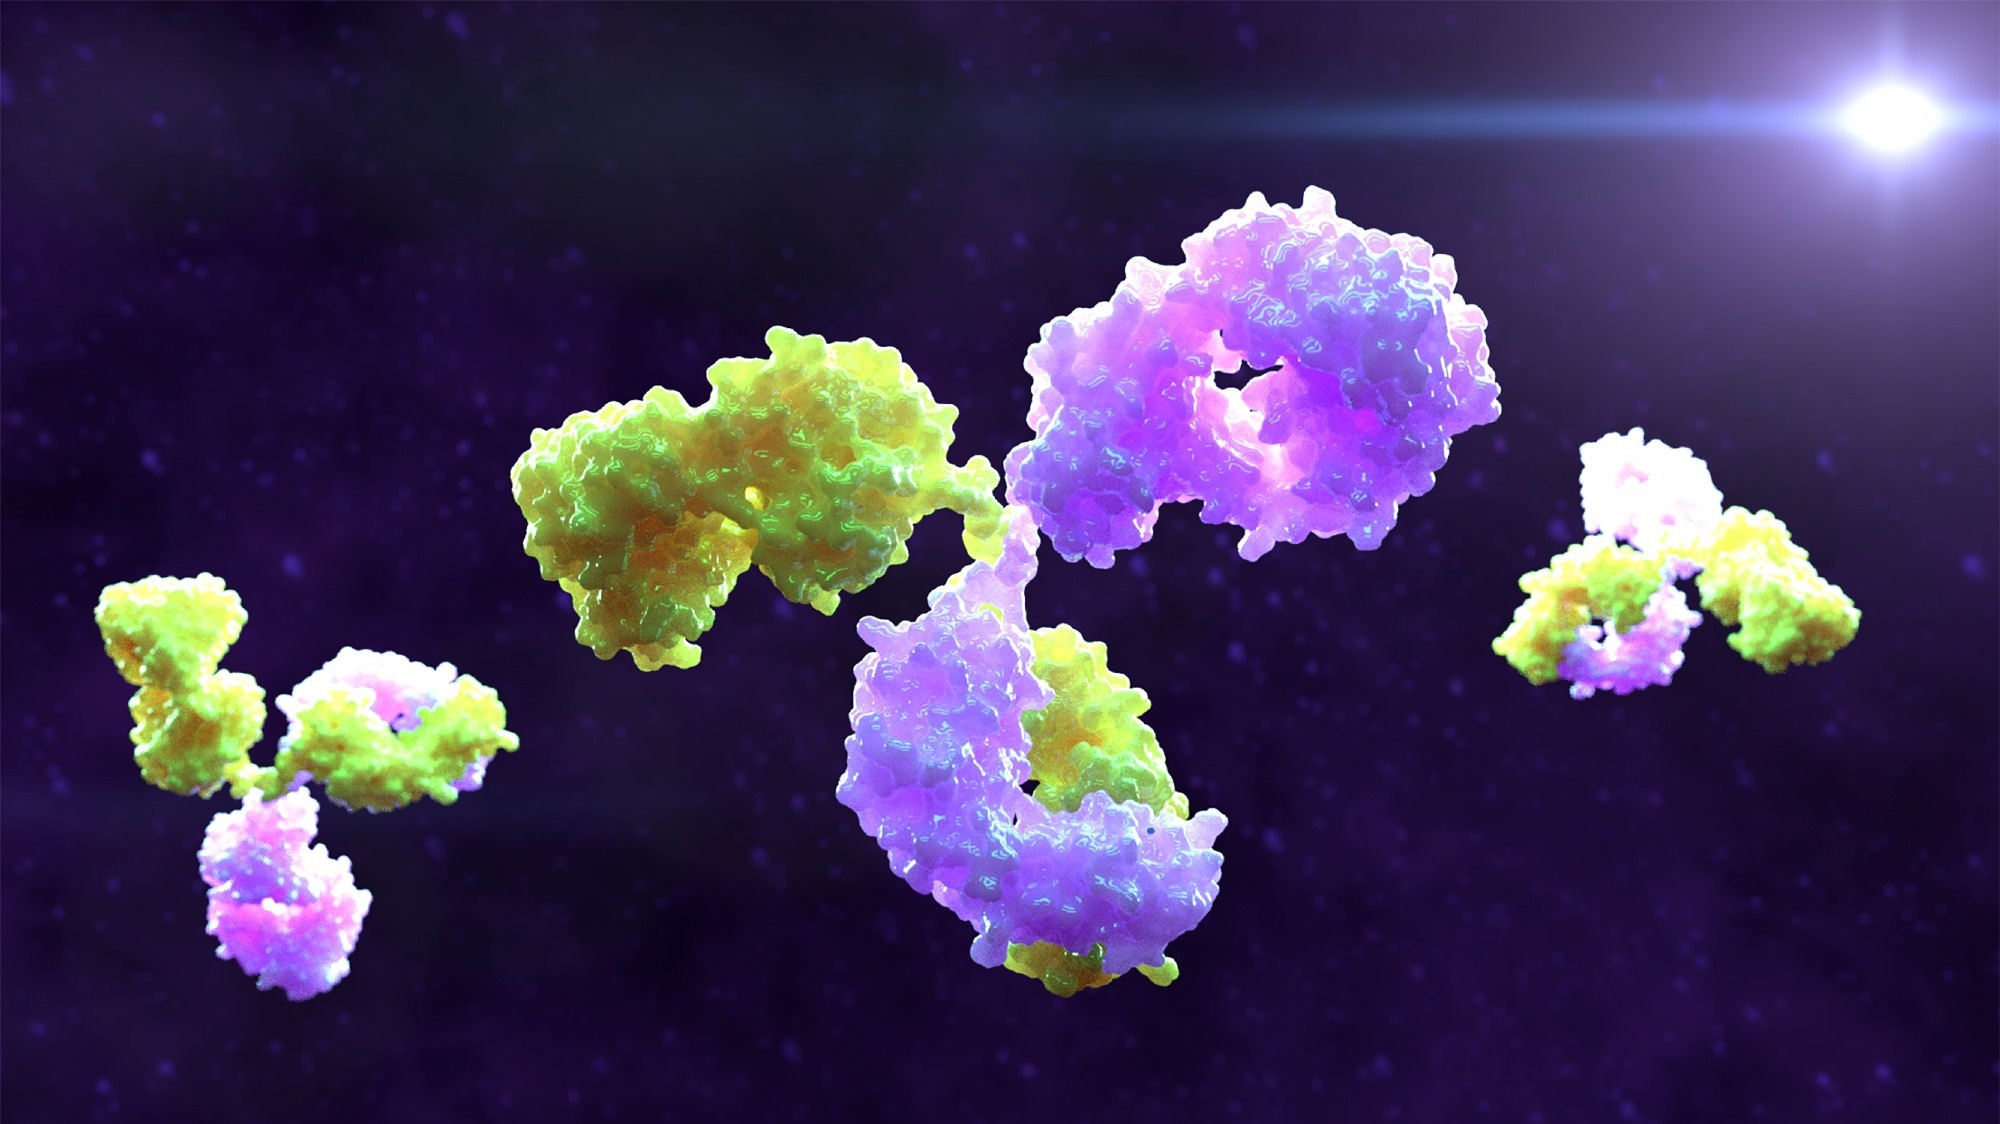 Study: Bispecific antibodies with broad neutralization potency against SARS-CoV-2 variants of concern. Image Credit: Alpha Tauri 3D Graphics / Shutterstock